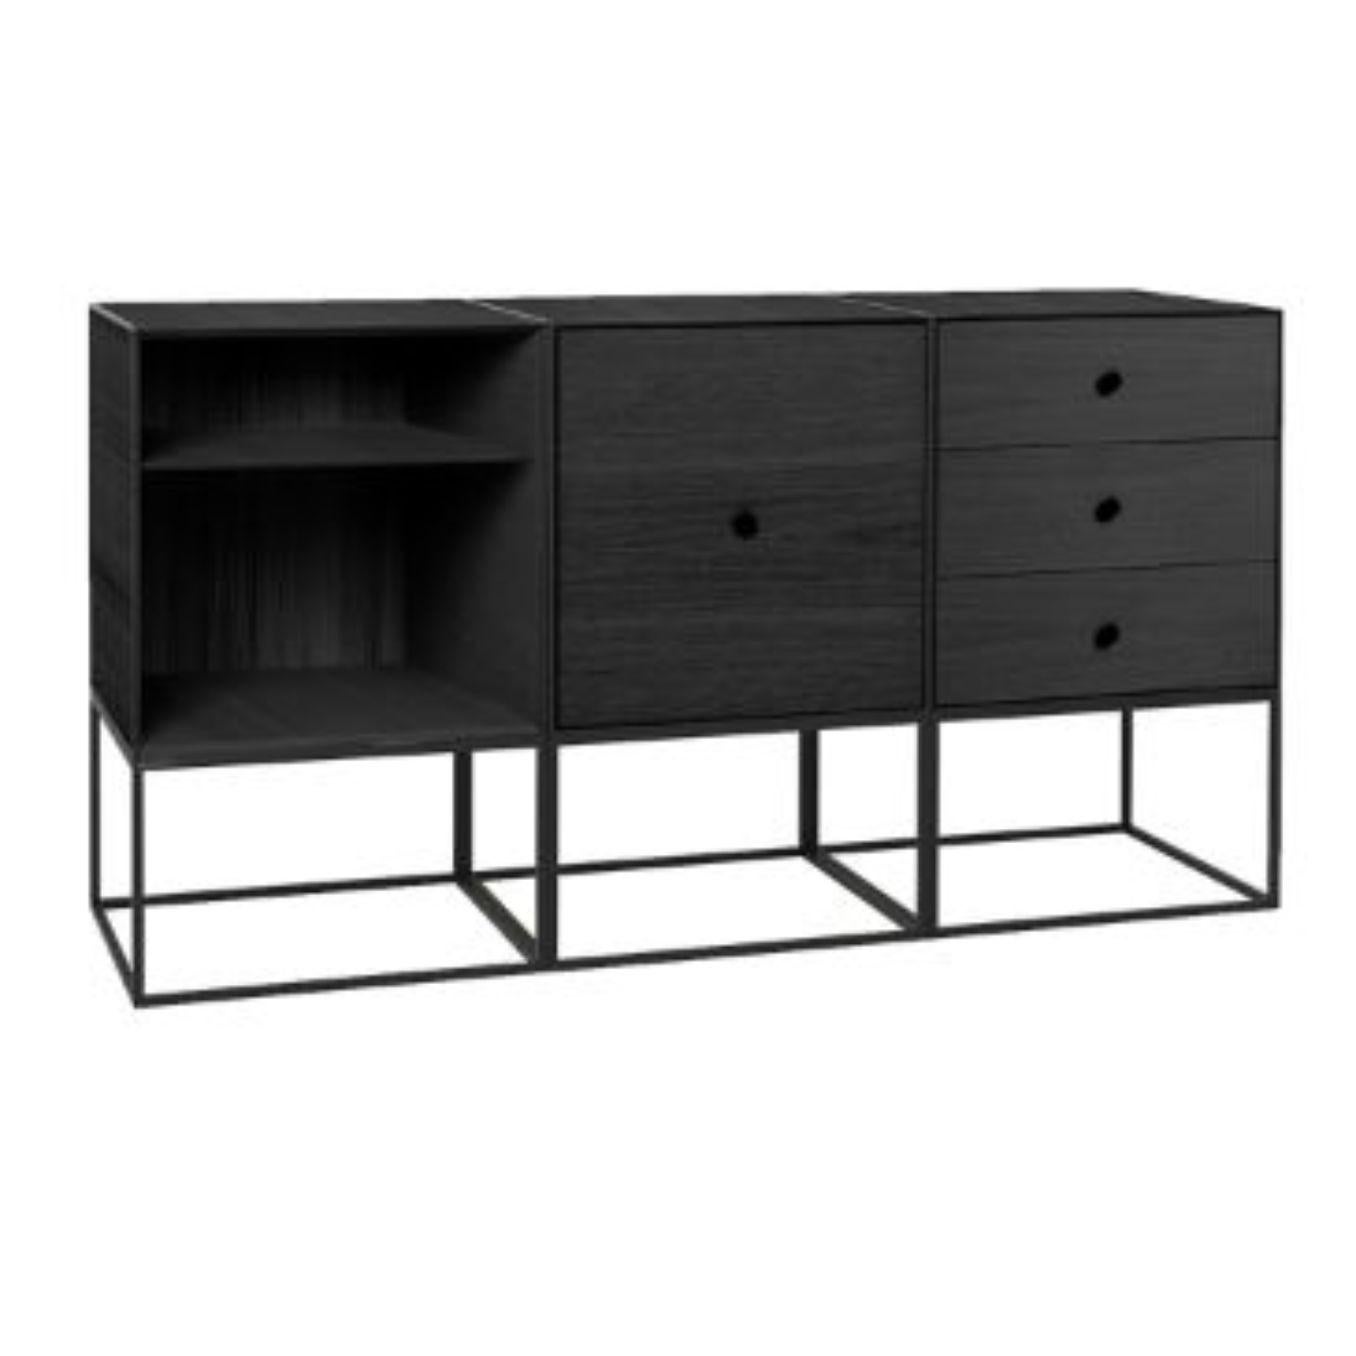 49 Black ash frame sideboard Trio by Lassen.
Dimensions: D 147 x W 42 x H 77 cm 
Materials: Finér, Melamin, Melamine, Metal, Veneer, Ash
Also available in different colors and dimensions. 
Weight: 88 Kg

By Lassen is a Danish design brand